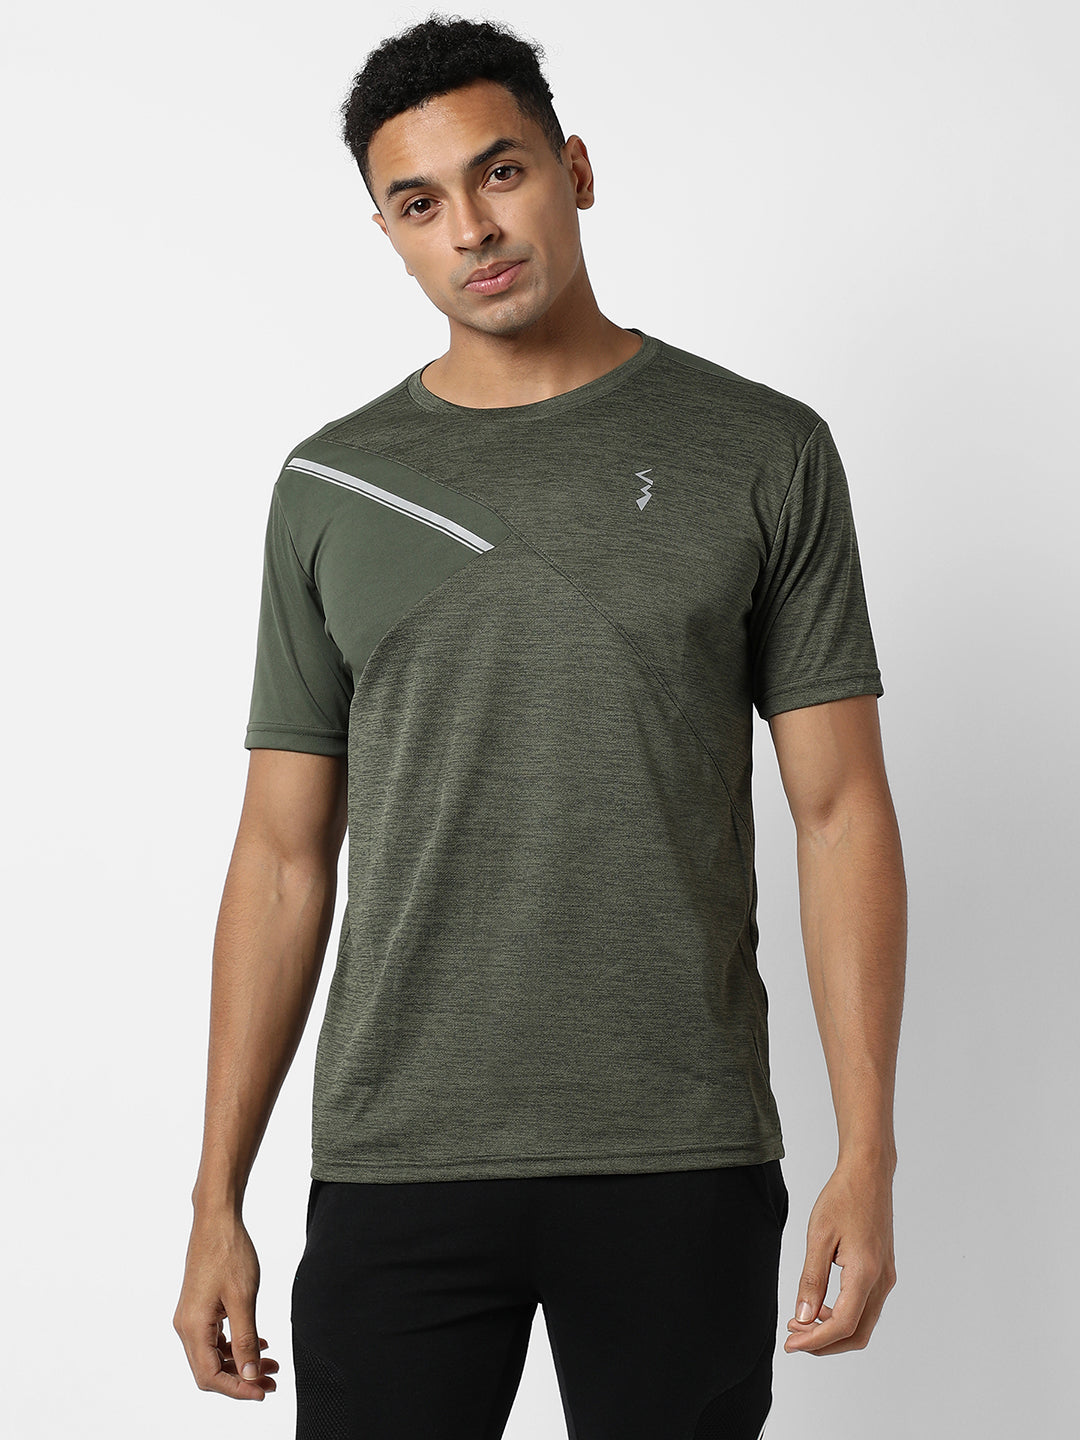 Contrast Heathered Activewear T-Shirt